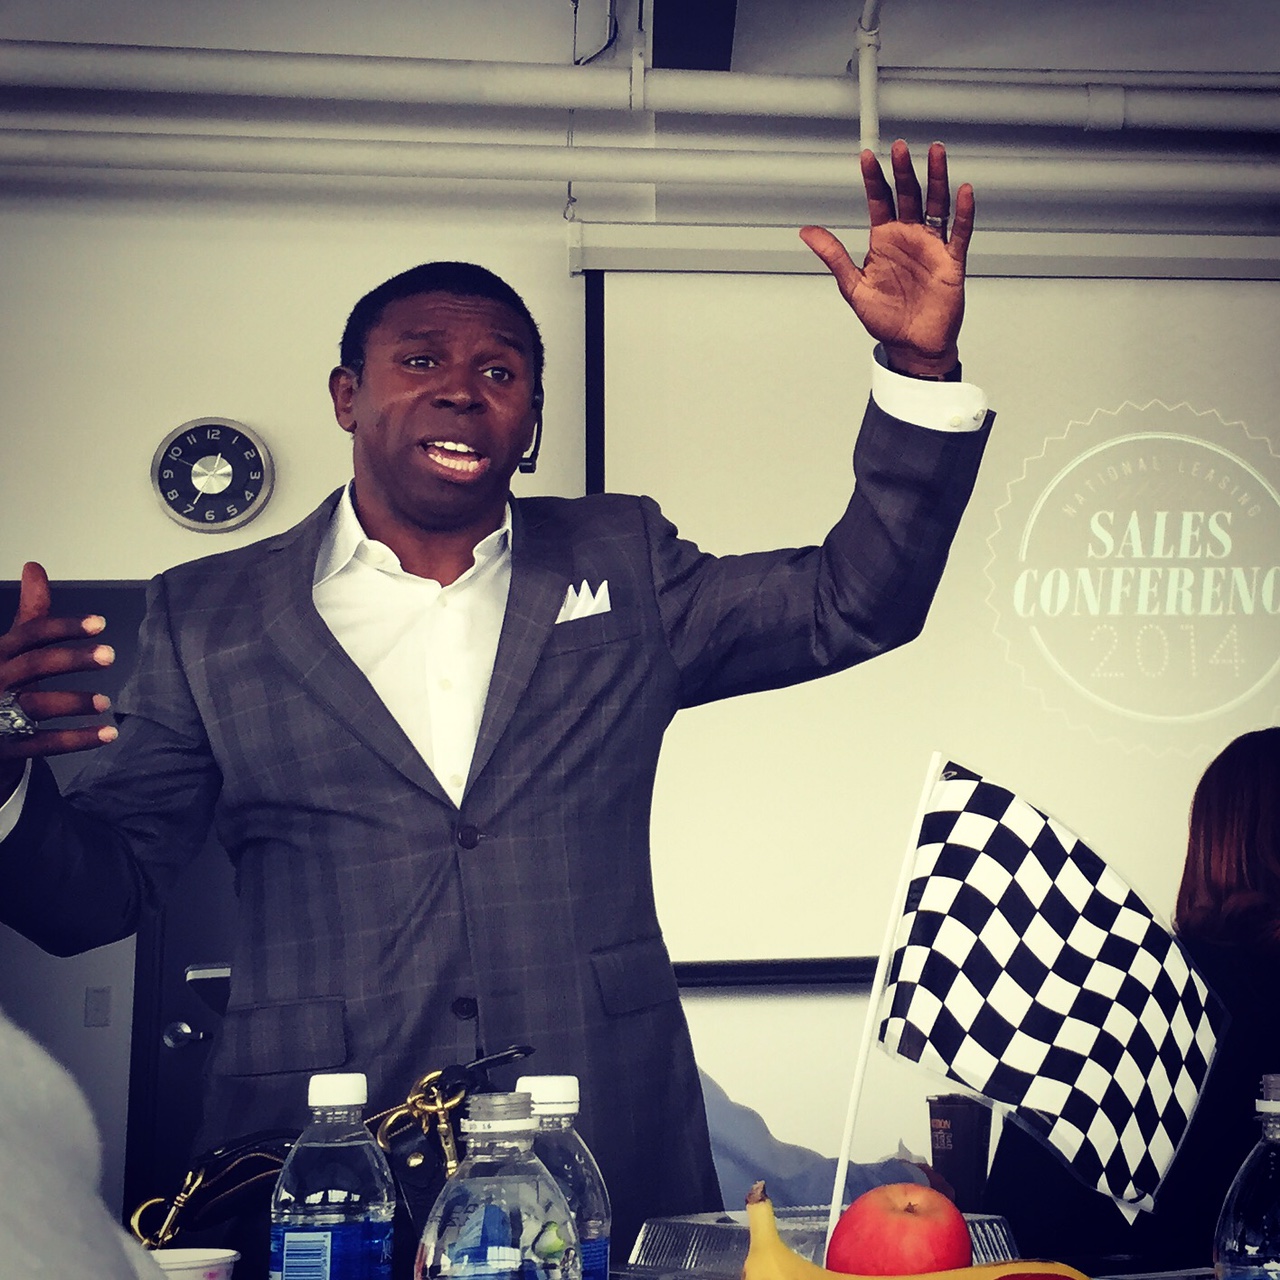 Michael “Pinball” Clemons taught employees how to ‘WIN BIG’ during his keynote address at the Sale Conference